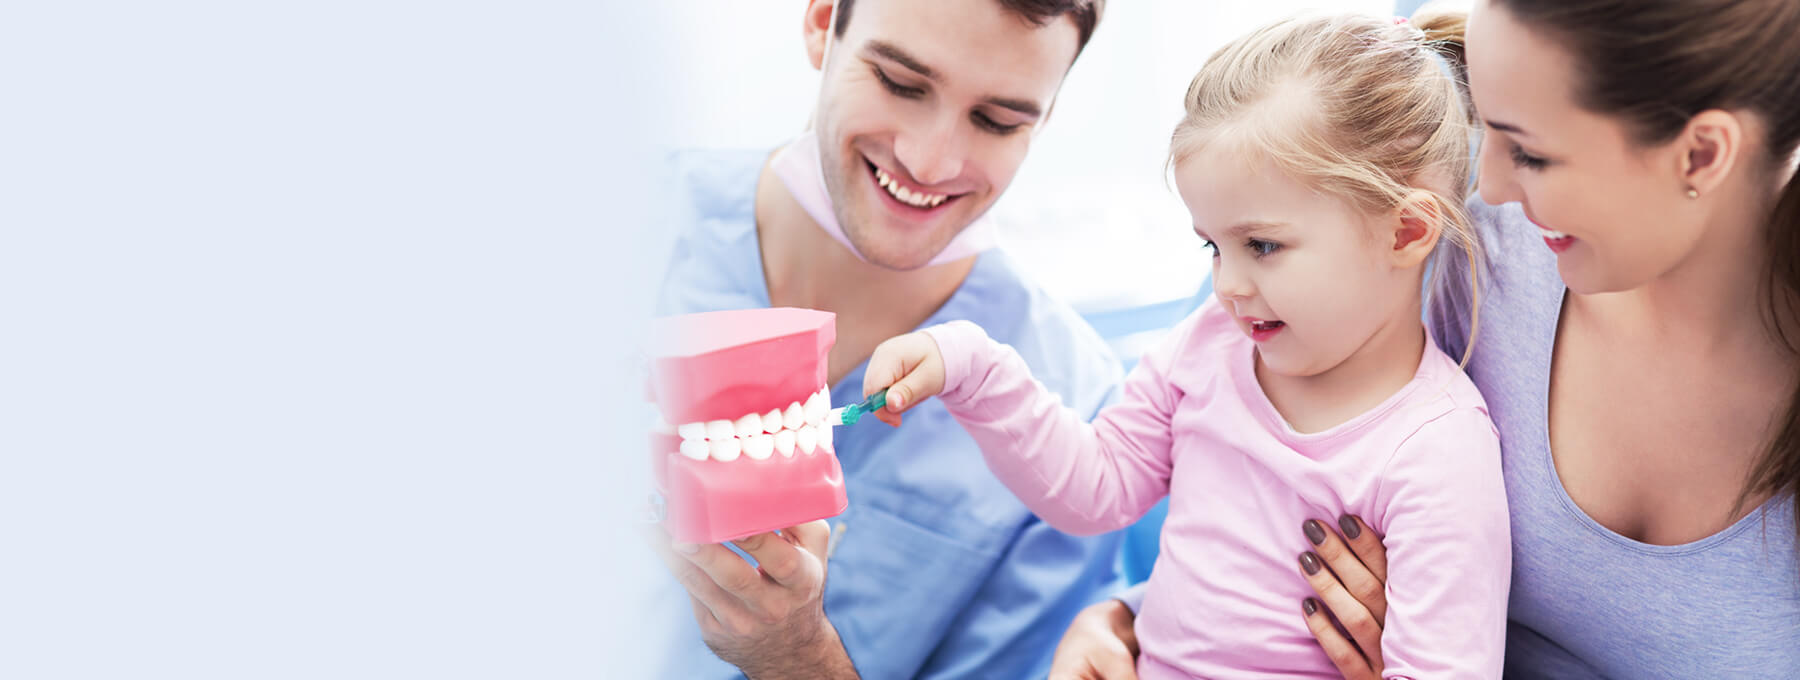 Dental Implants Melbourne Experts Are talking about ways to select the best treatment centre